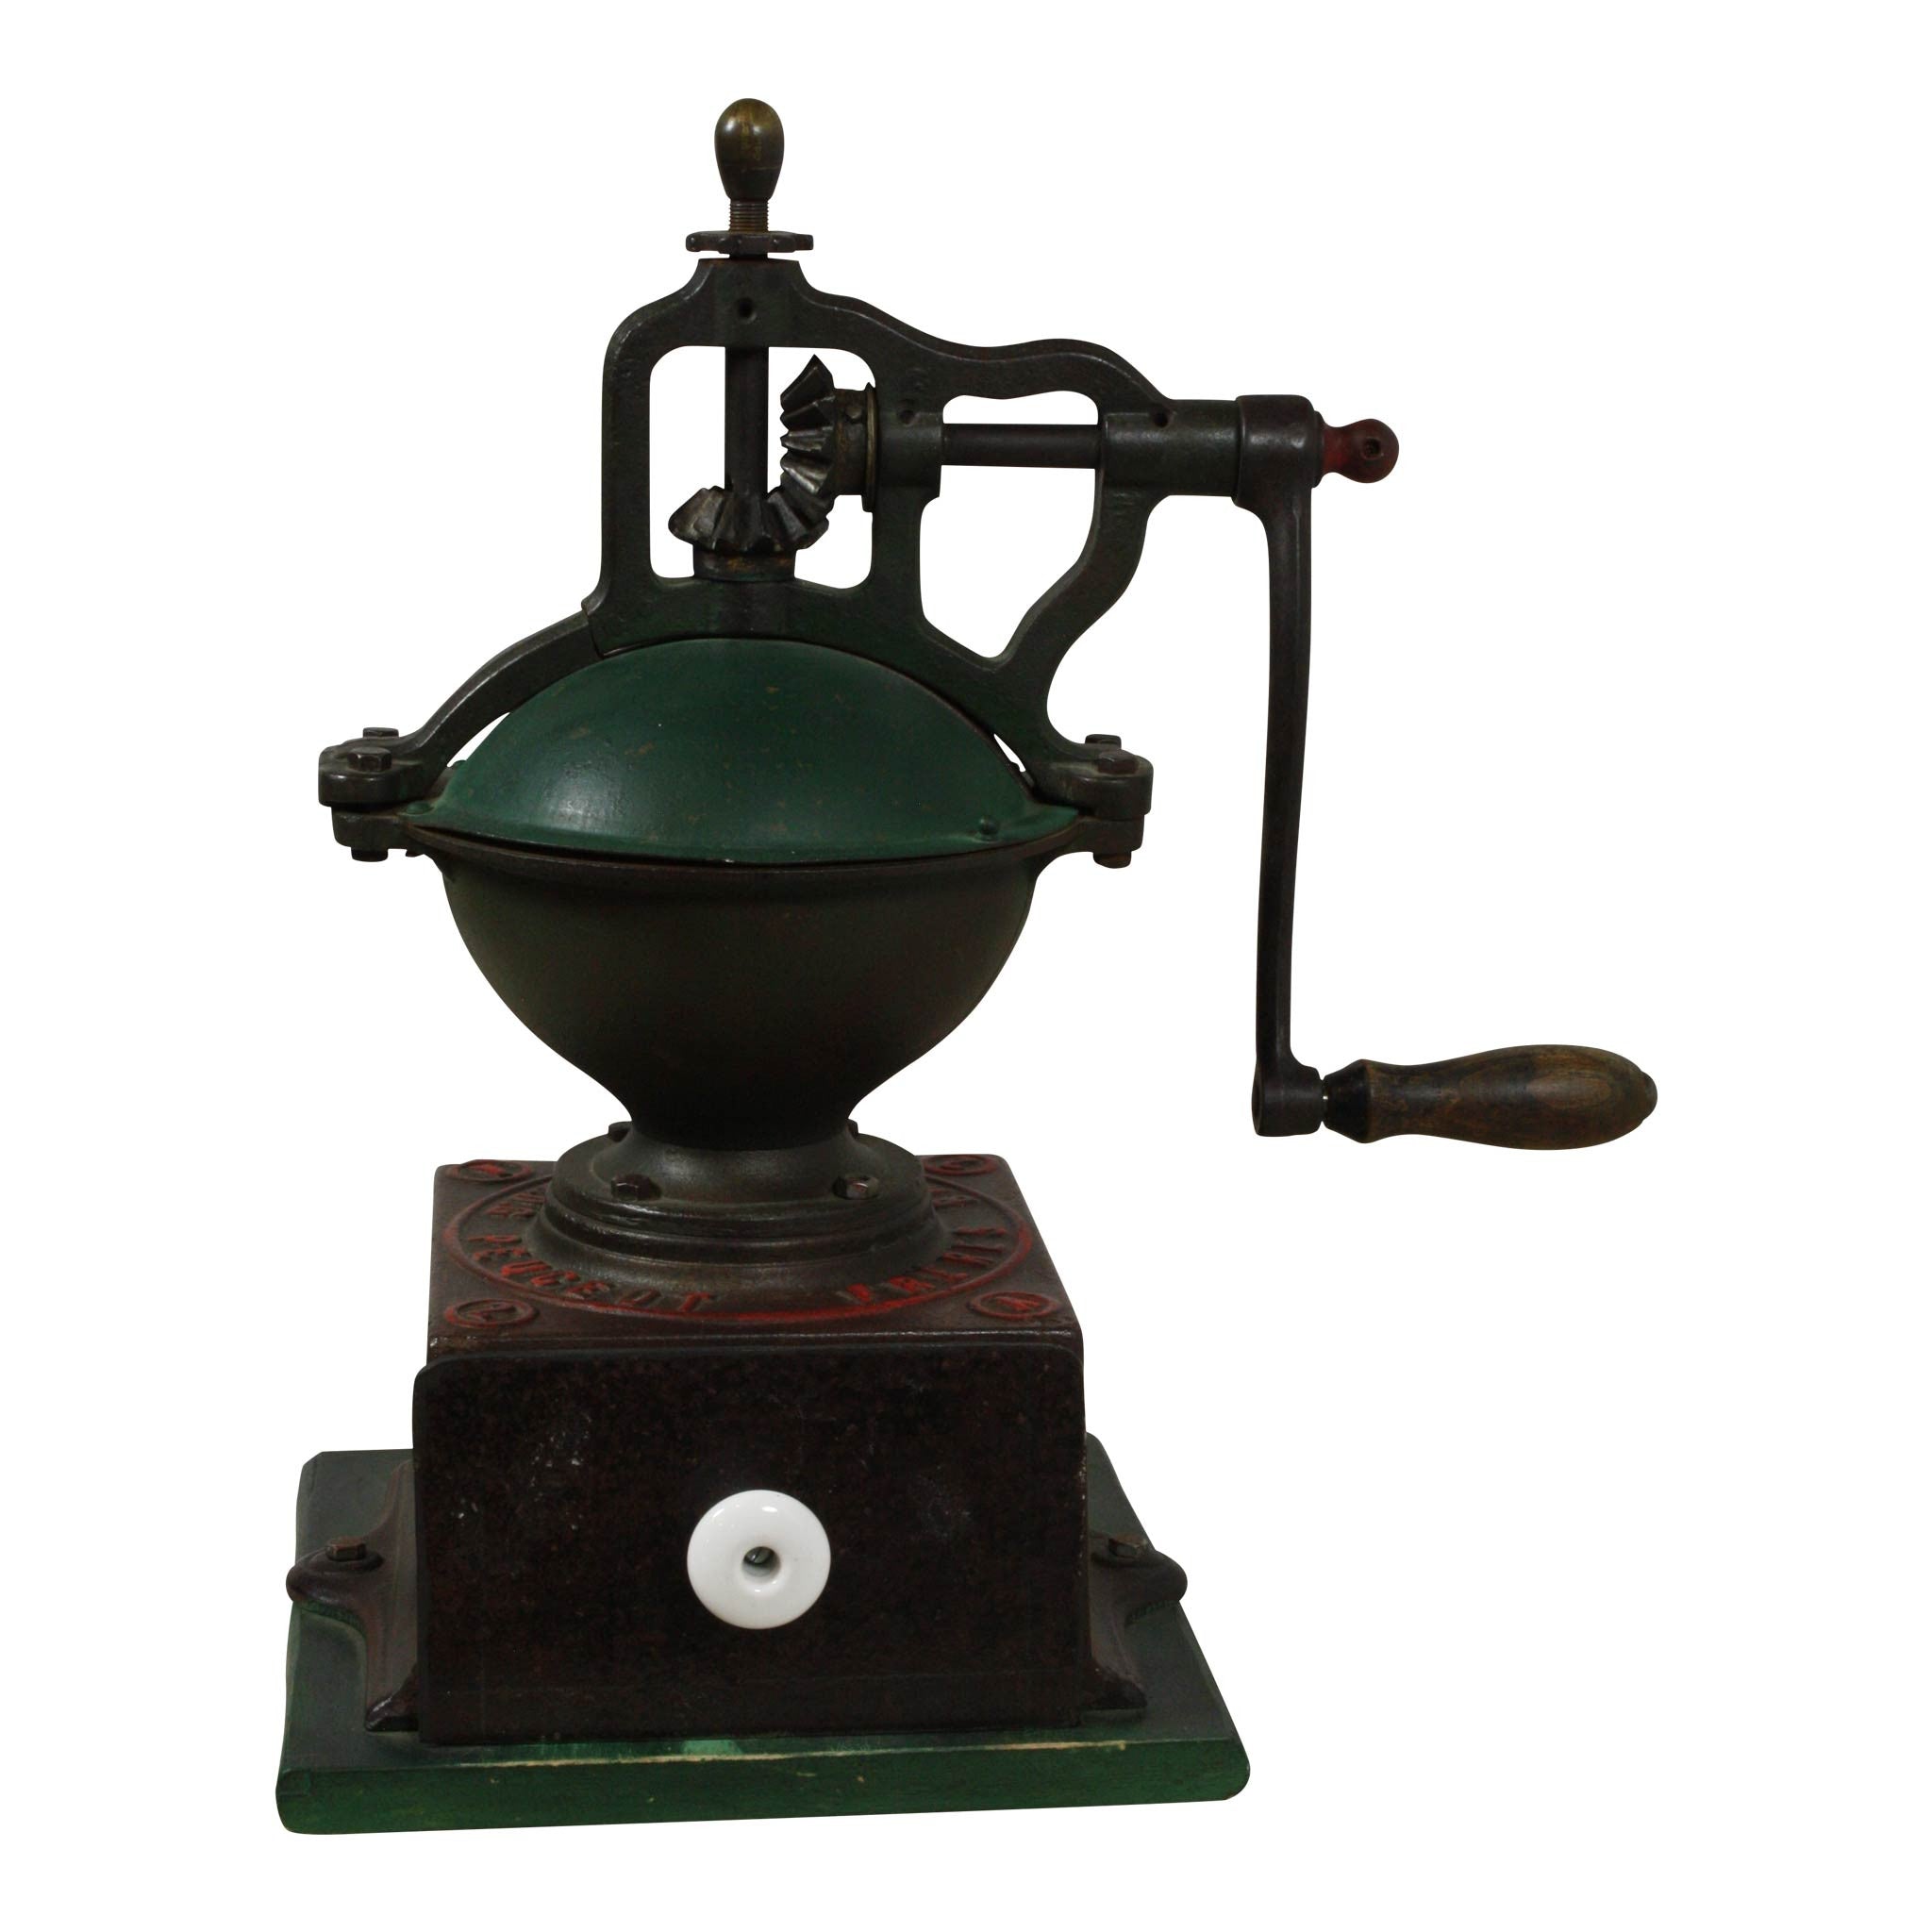 ski-country-antiques - Vintage French Industrial Coffee Grinder